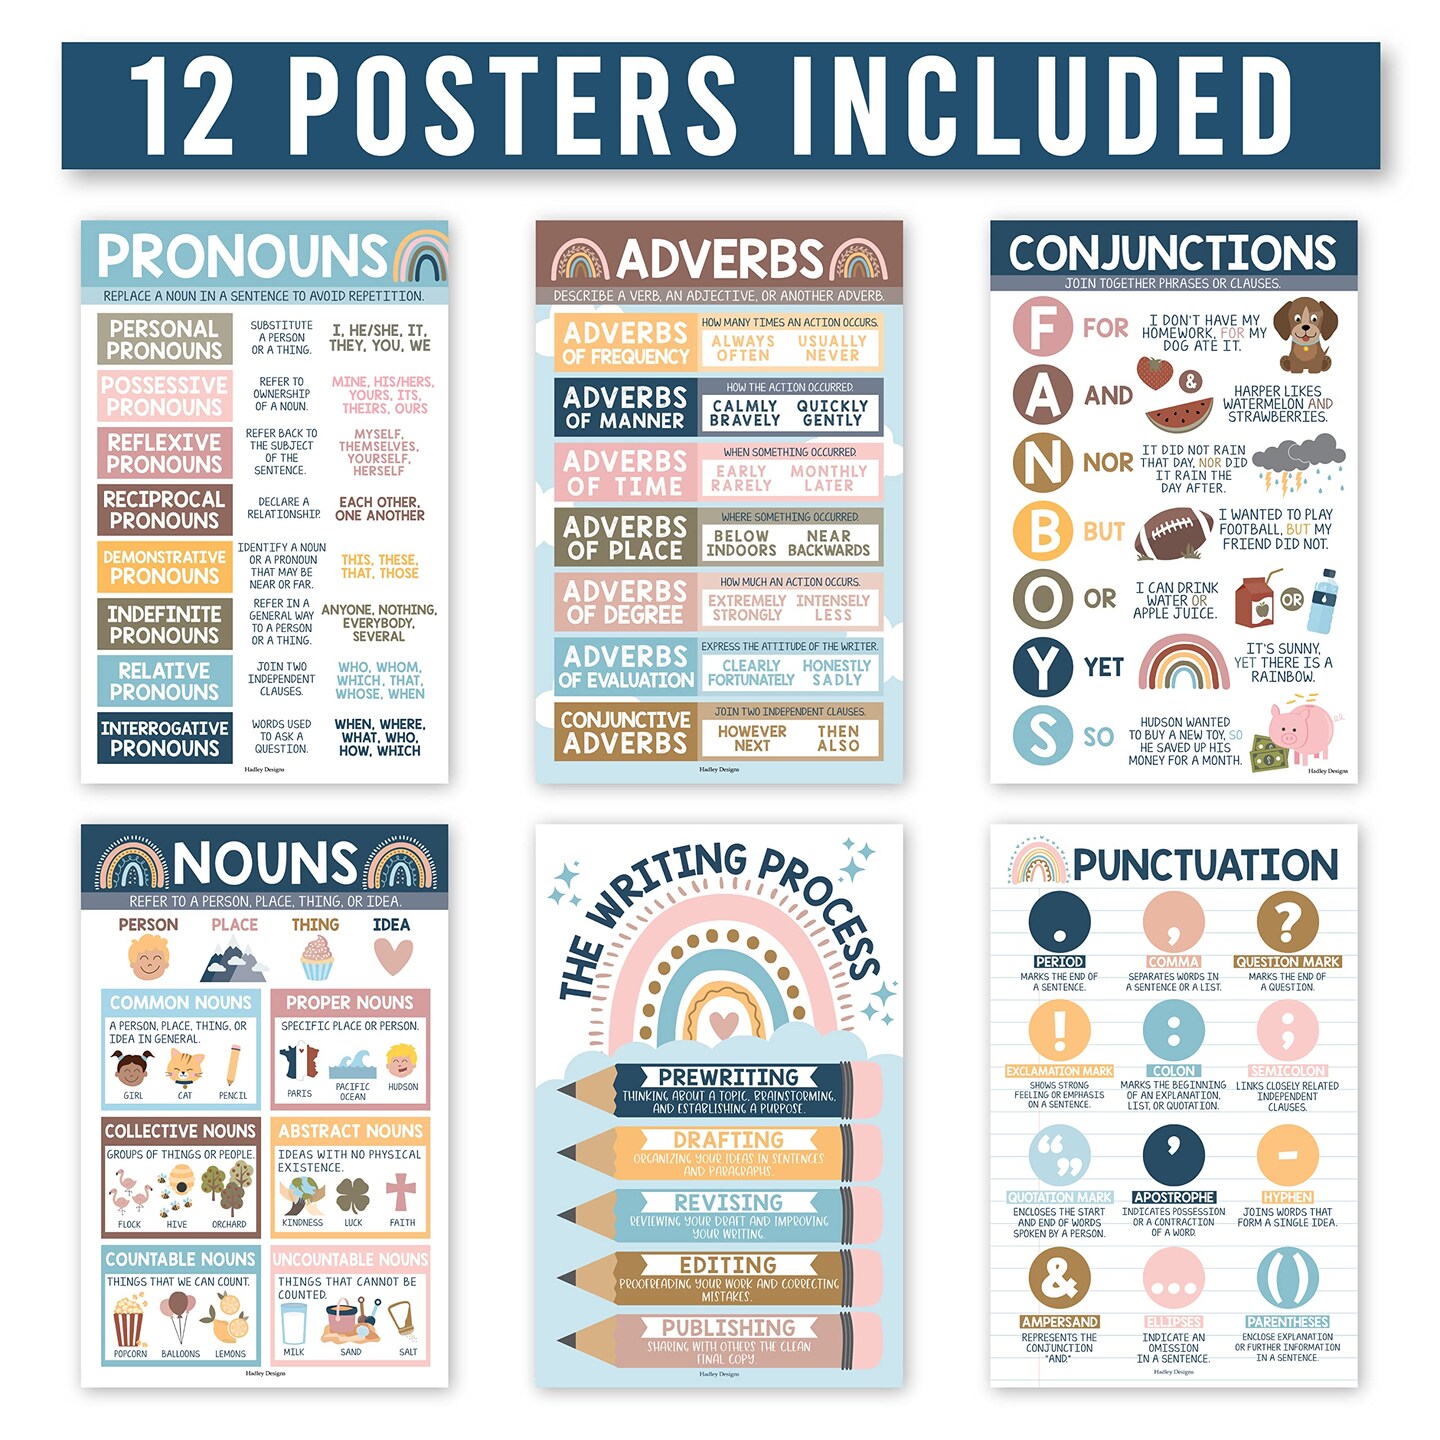 12 Parts Of Speech Posters For Elementary Posters For Language Arts - Grammar Posters For Classroom Elementary Classroom Must Haves, Kids Educational Posters For Elementary School Posters